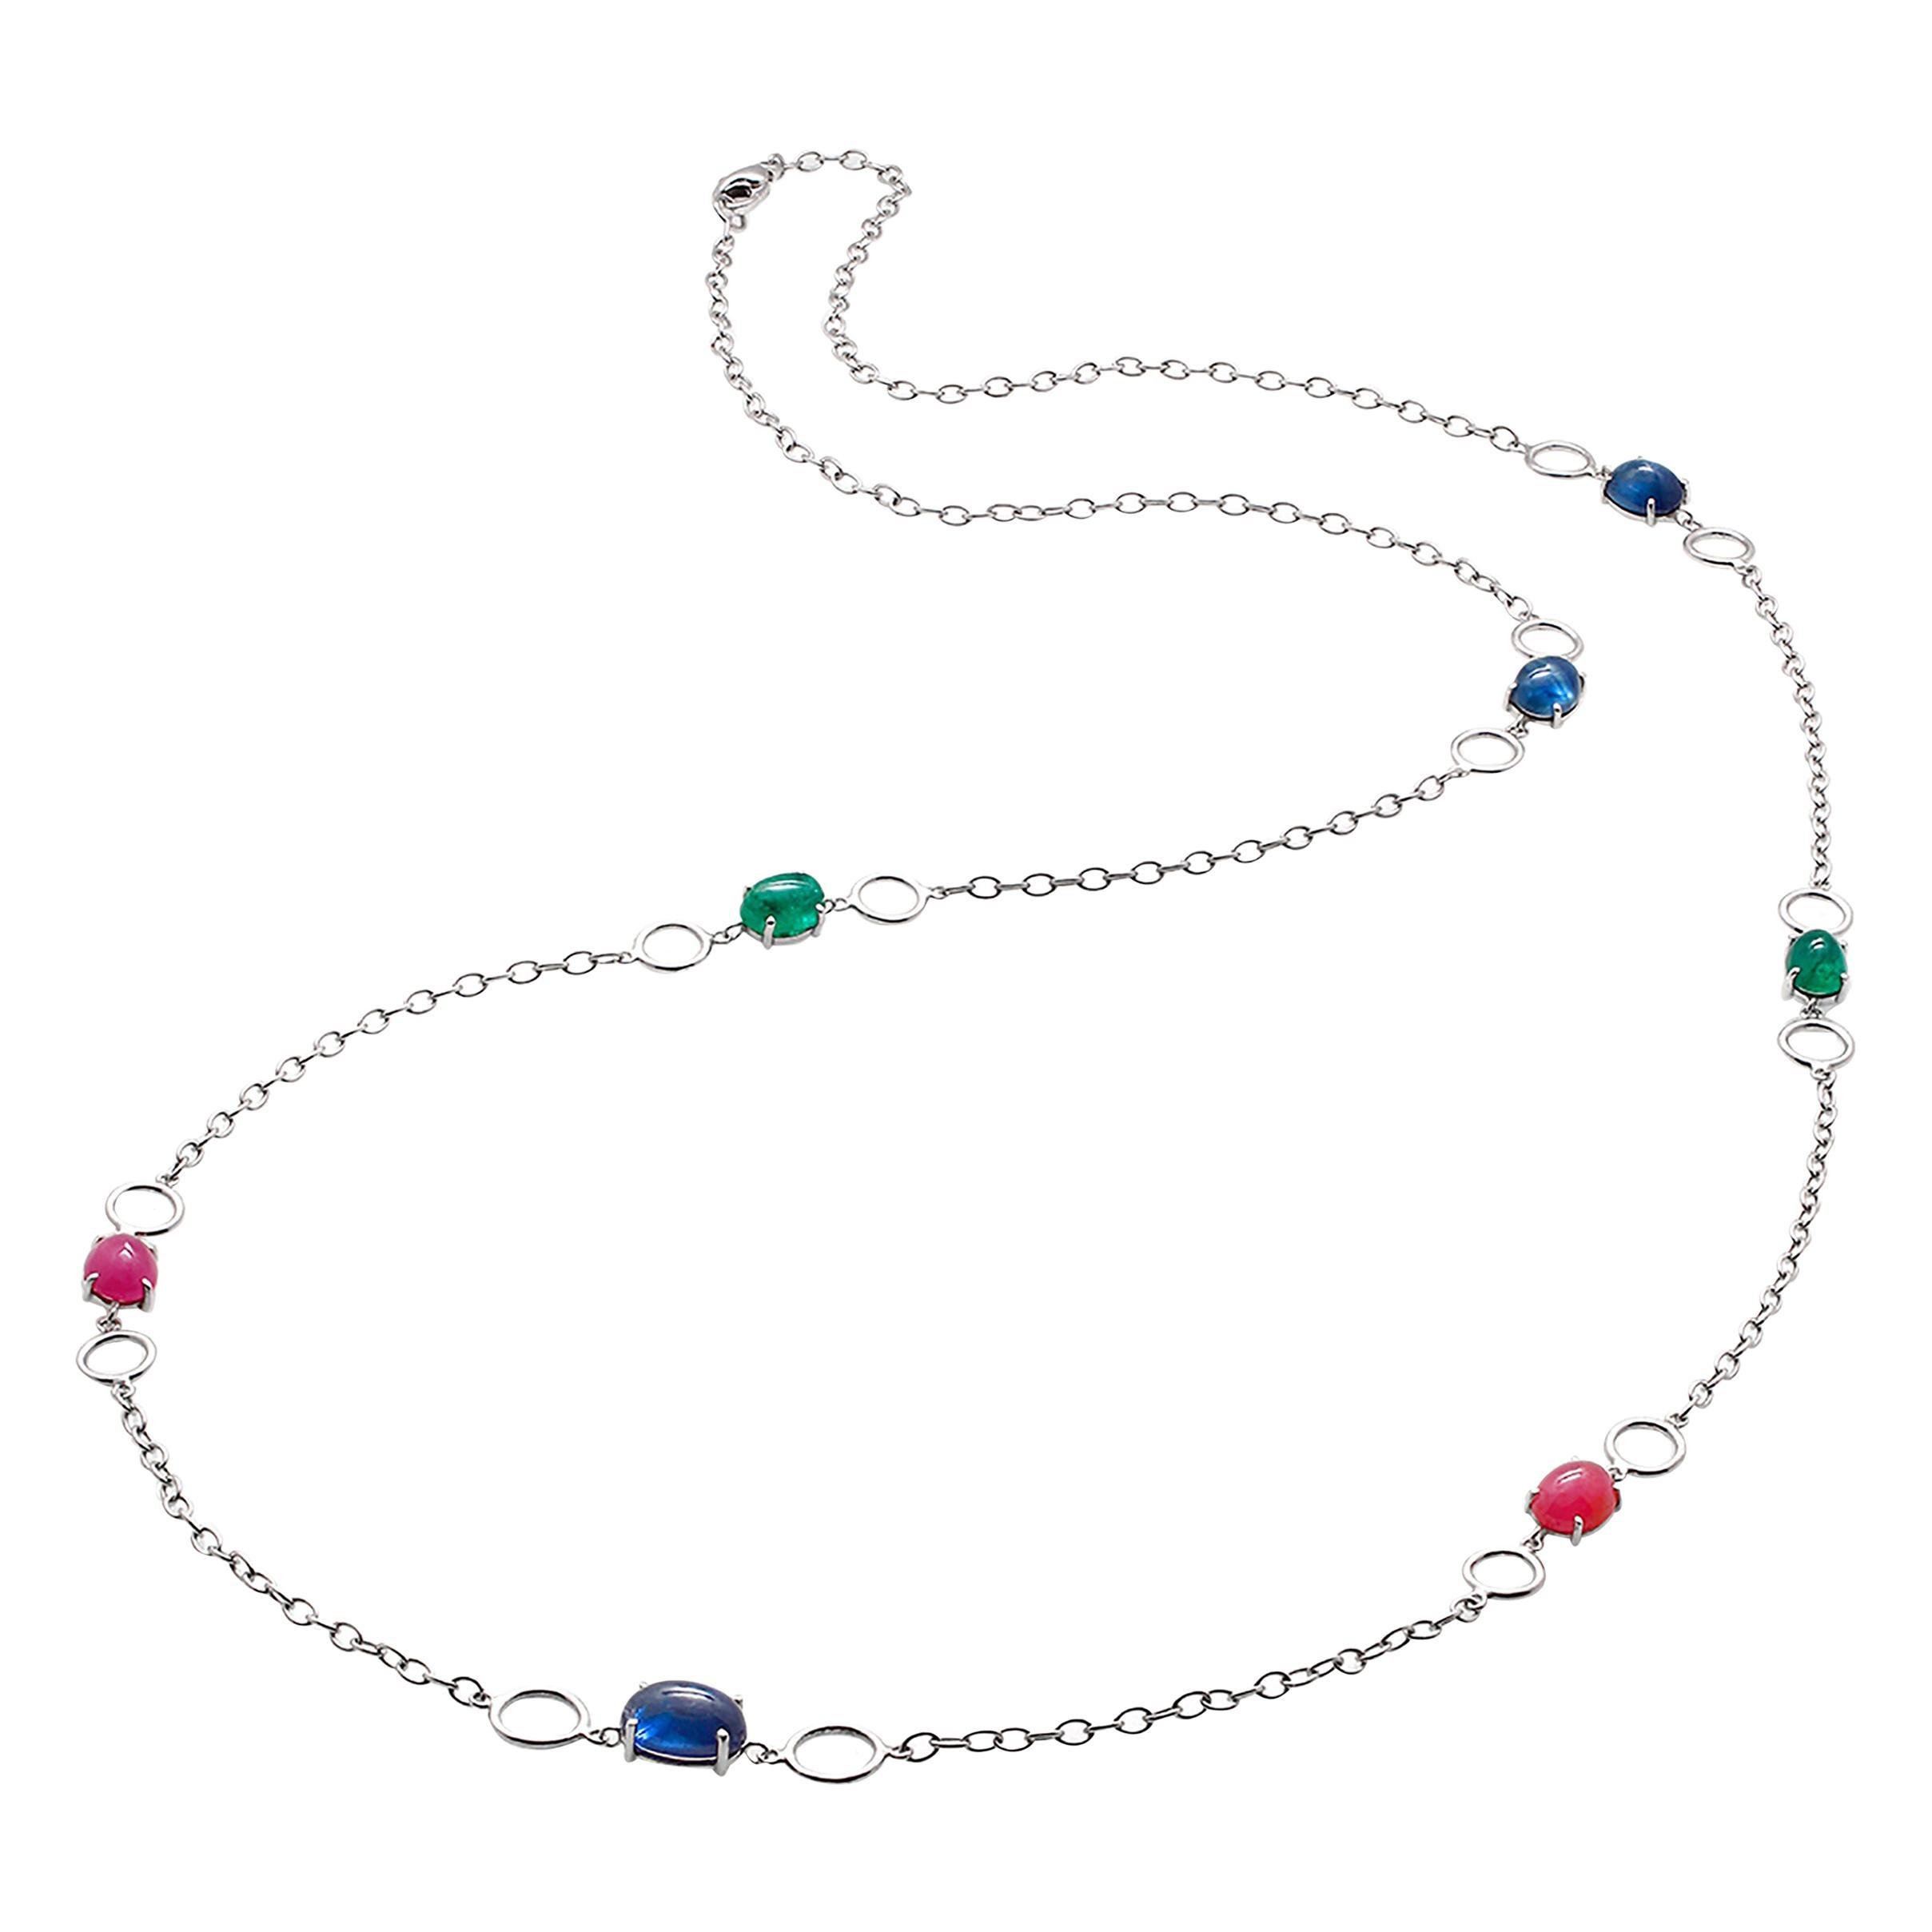 Seven Cabochon Sapphire Ruby Emerald Sautoir 40 Inch White Gold Necklace